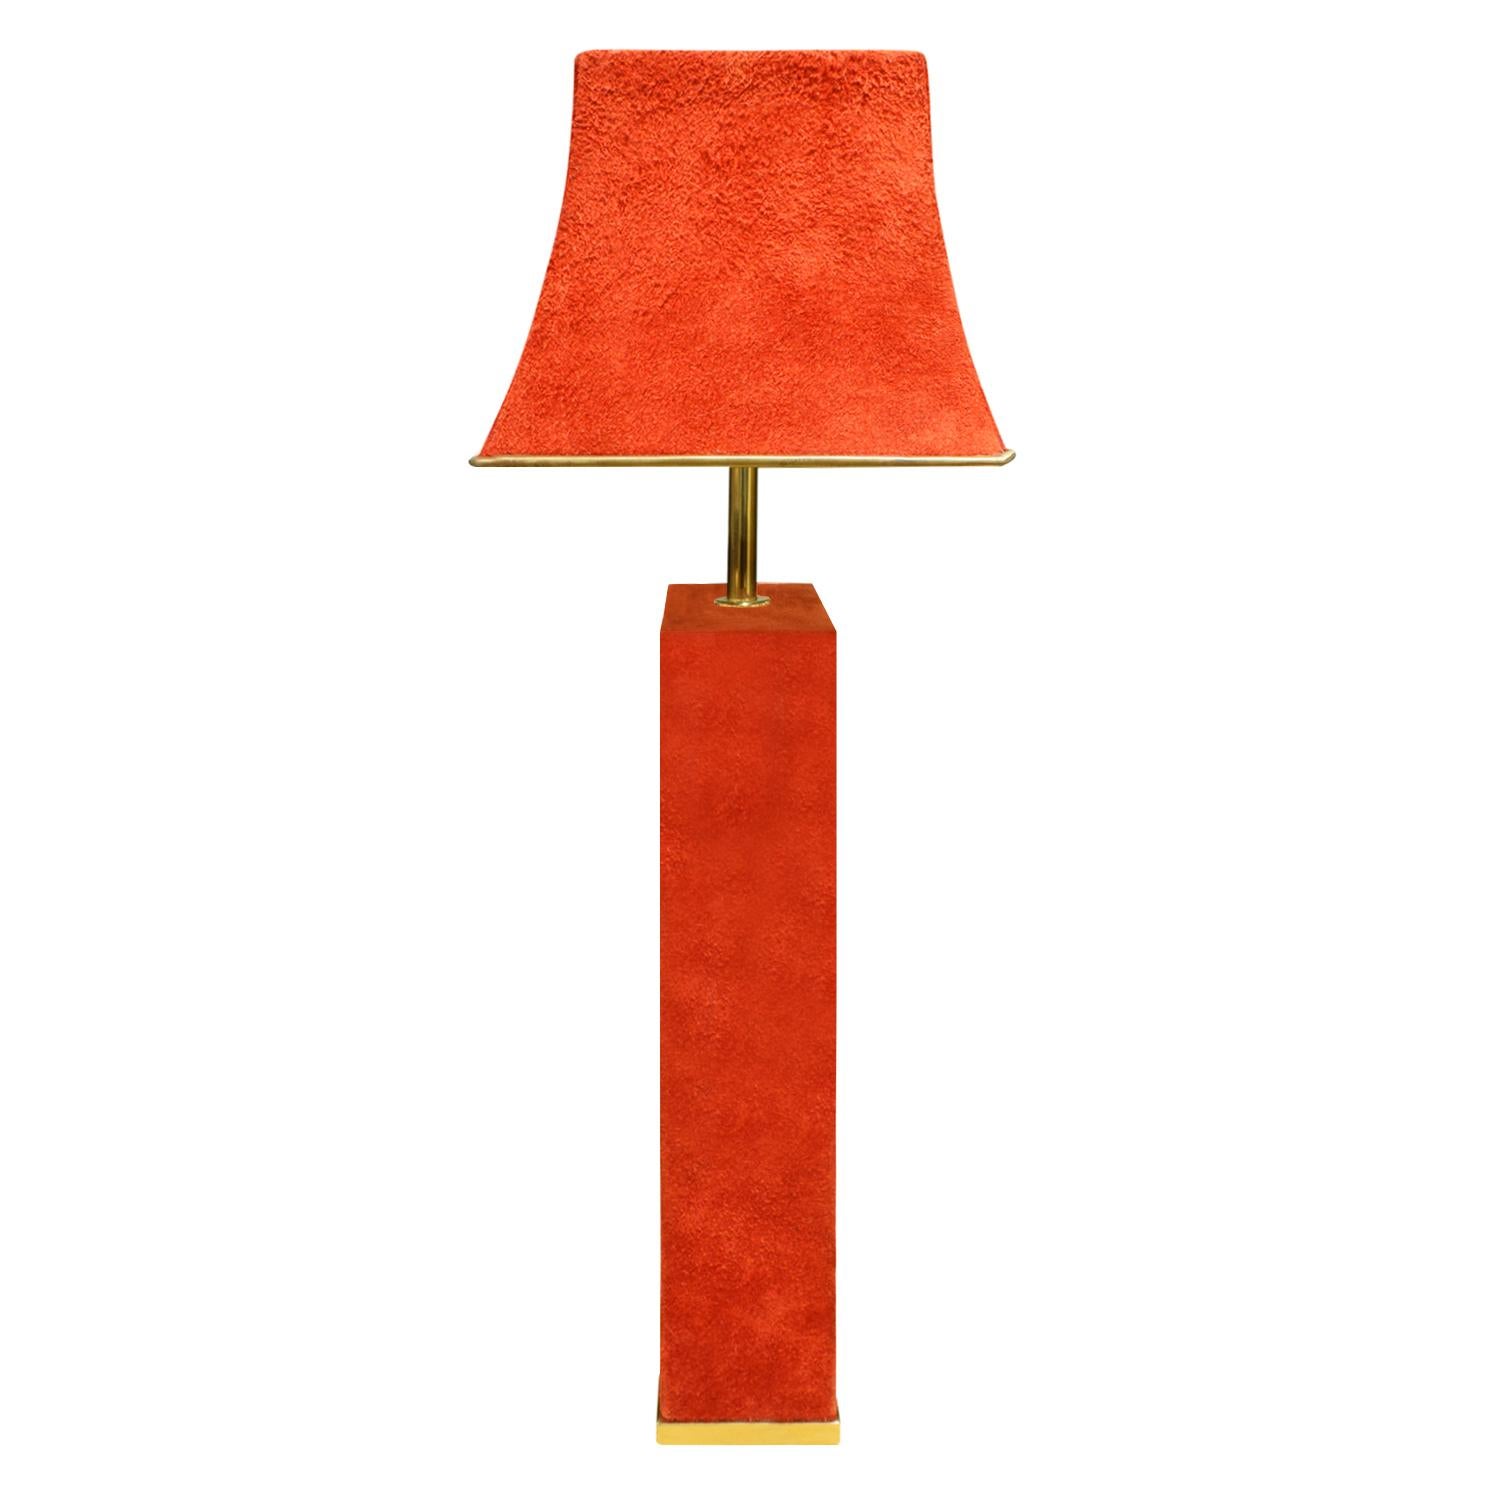 Exceptional table lamp and shade in brass clad with red suede by Karl Springer, American 1970's. This table lamp is very luxurious and a fine example of Springer’s unsurpassed craftsmanship.